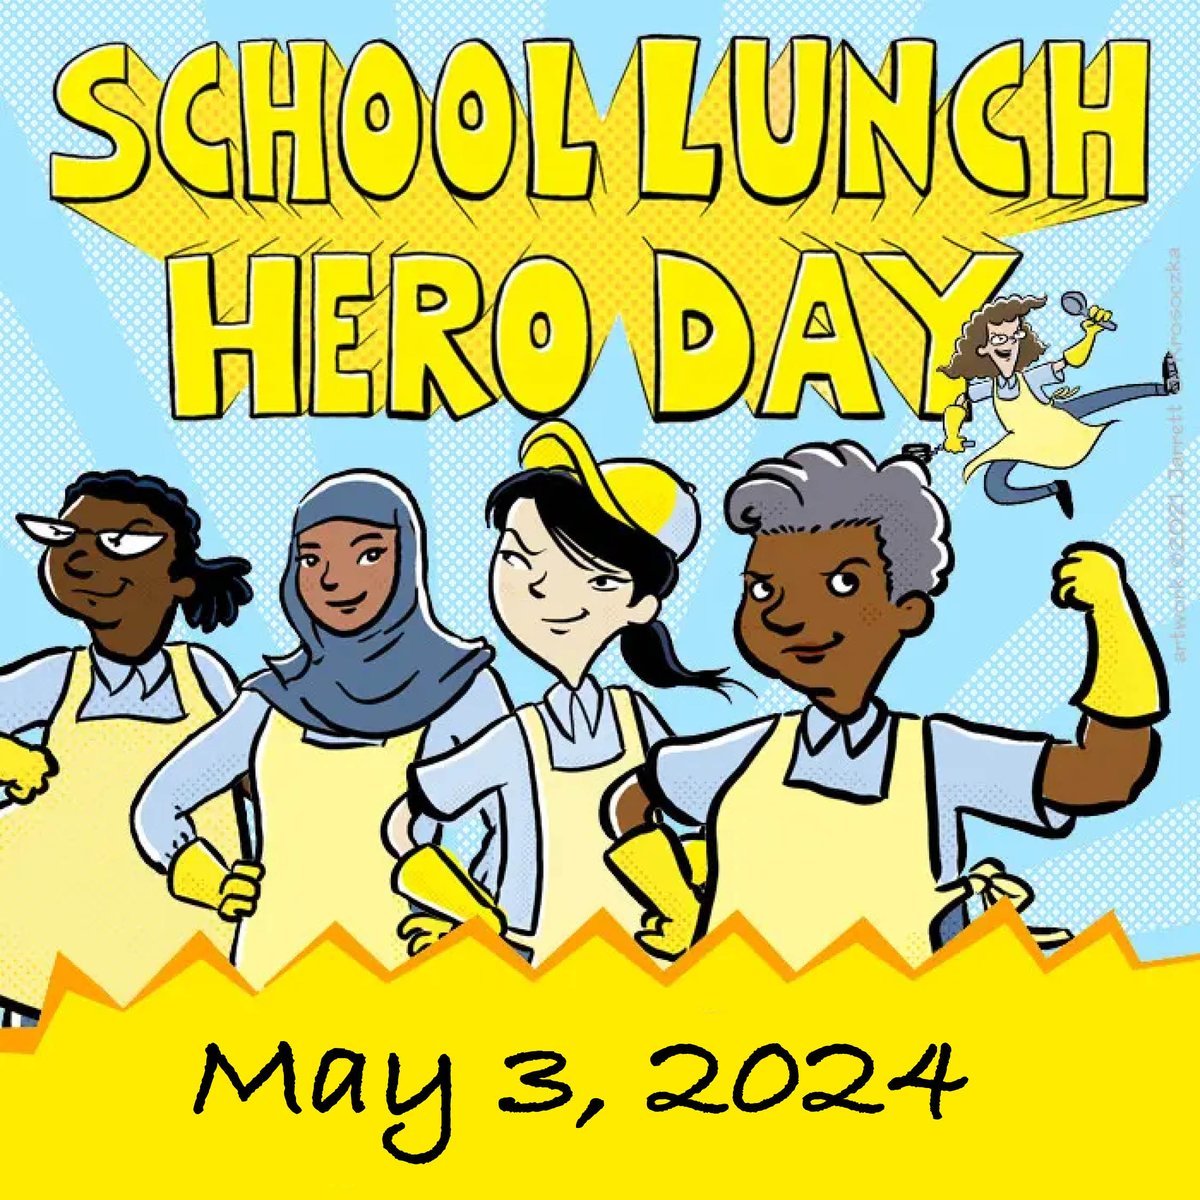 Happy School Lunch Hero Day to all the amazing school nutrition professionals in NC! Thank you for nourishing the minds & bodies of our students & making a positive impact on their lives every day! Take time today to thank the hardworking staff in your school cafeterias.